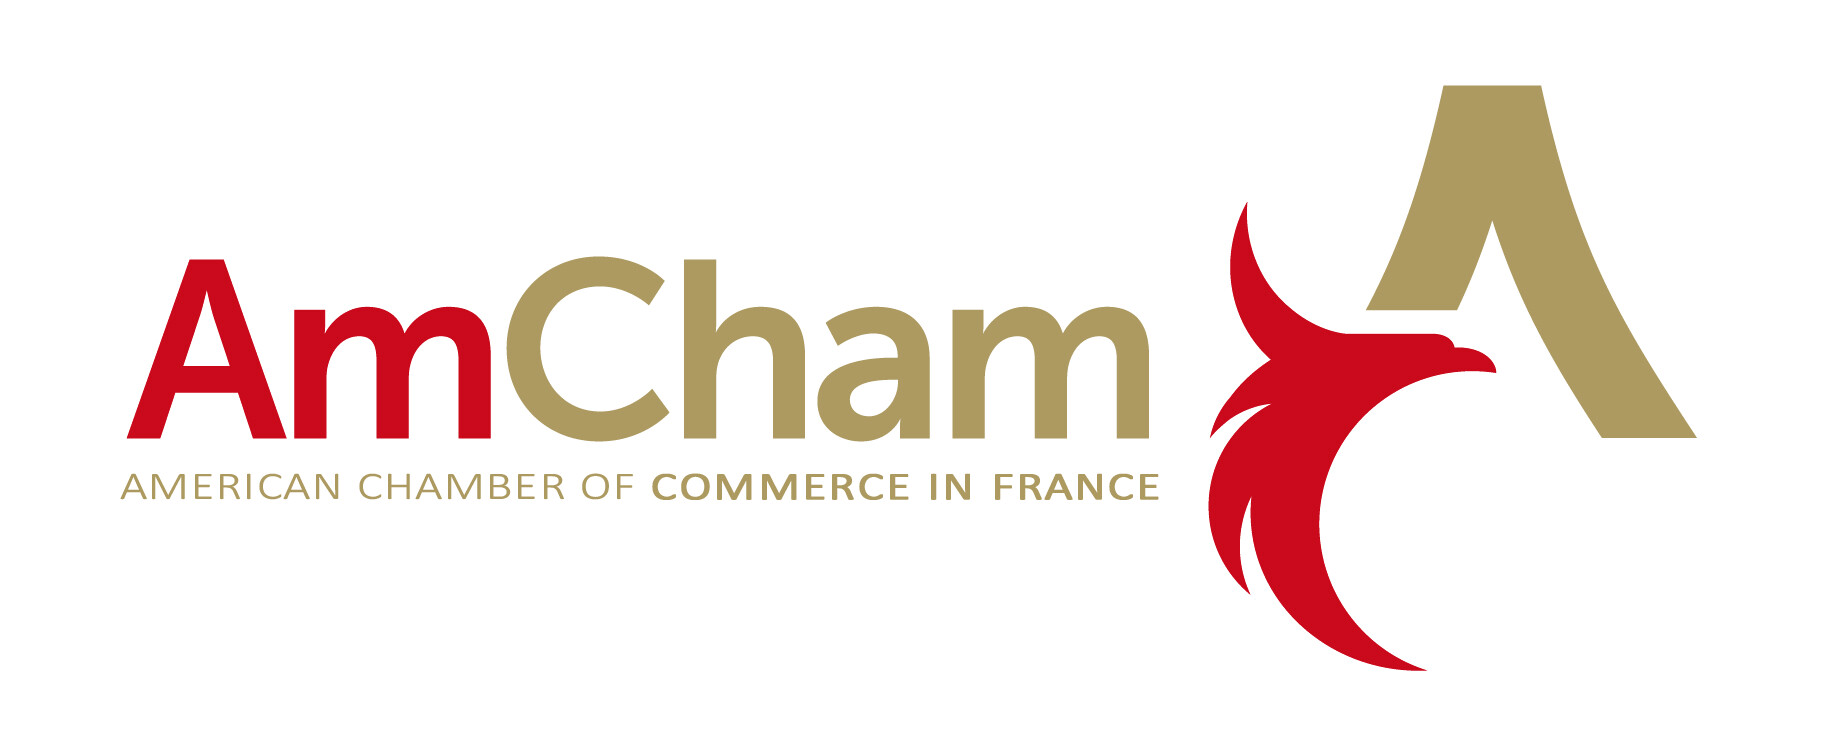 american_chamber_of_commerce_in_france_amcham